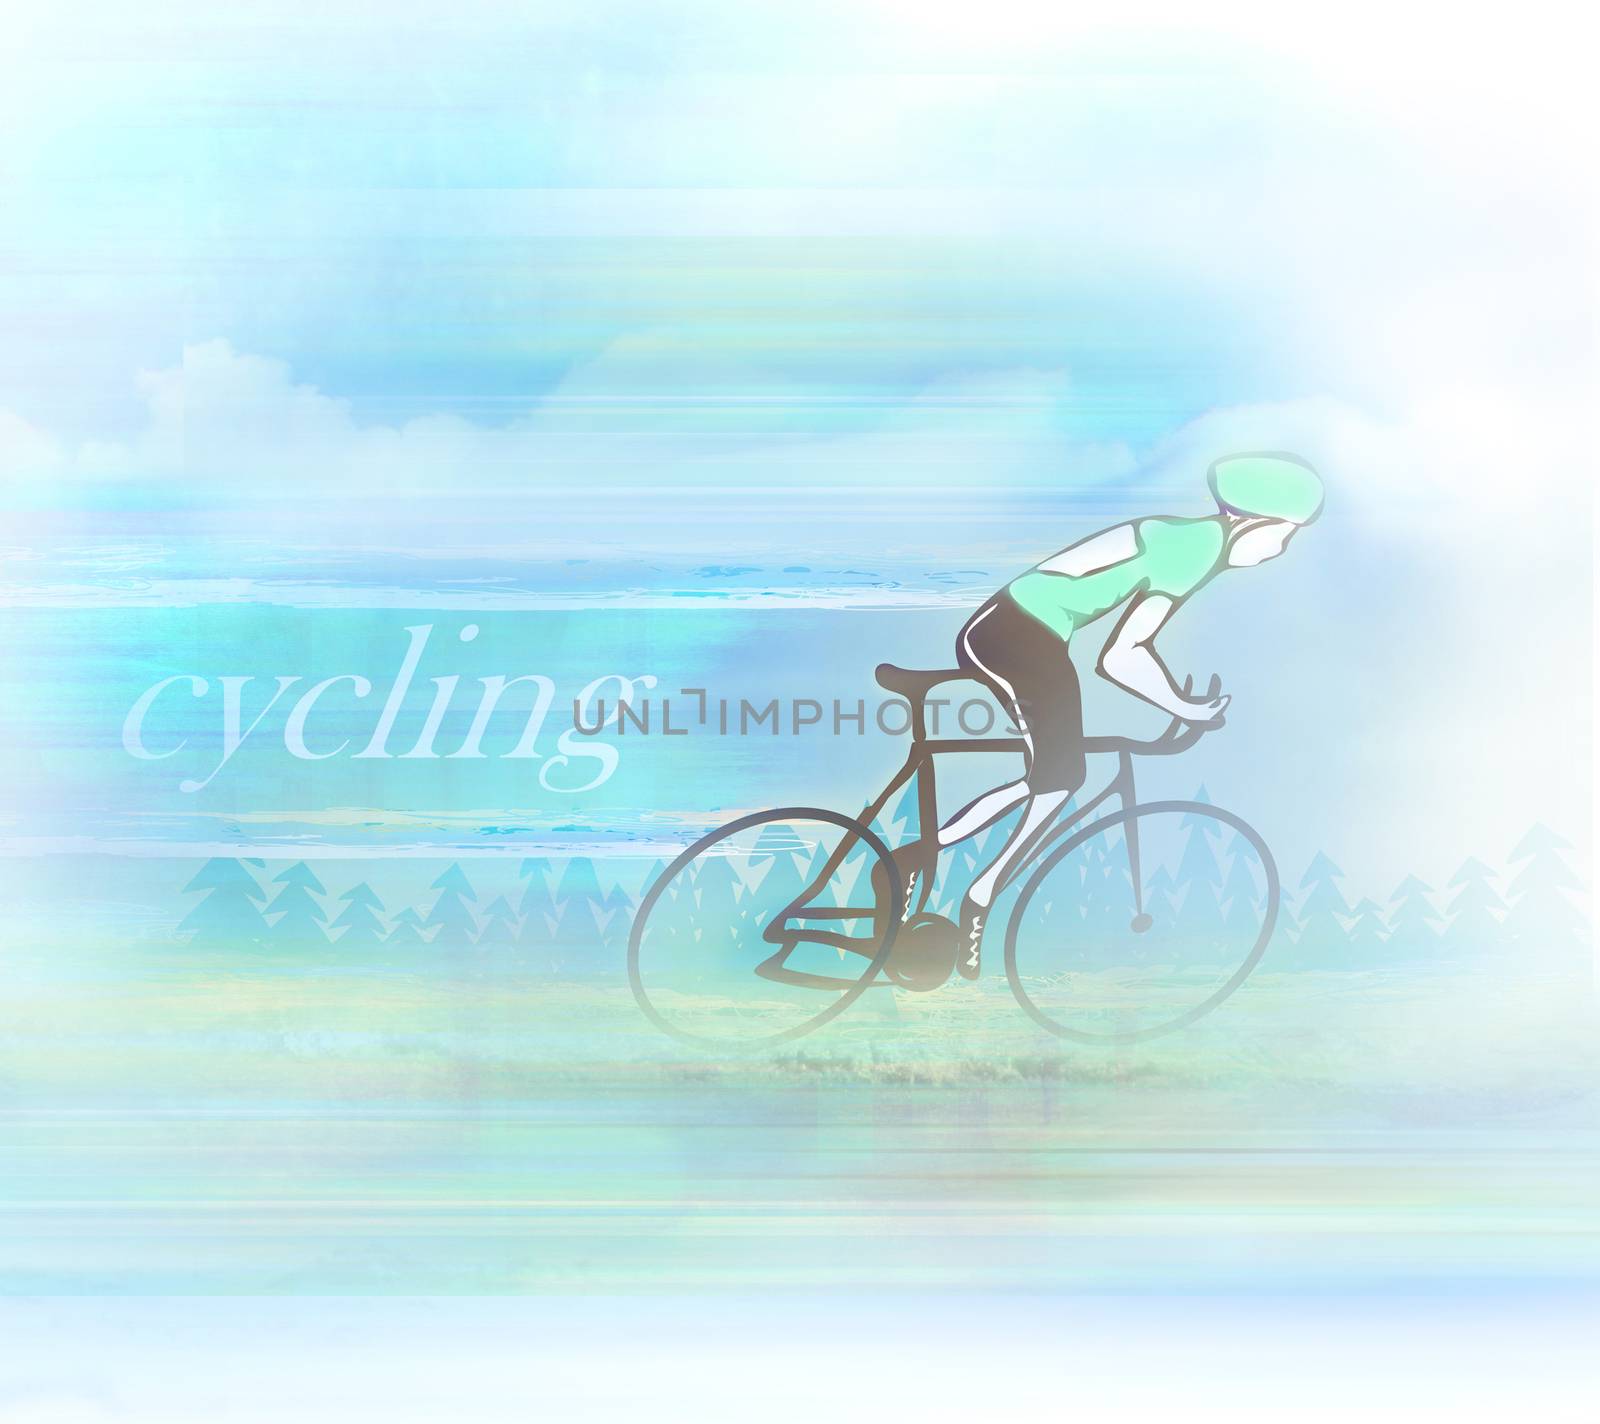 cycling race, abstract banner